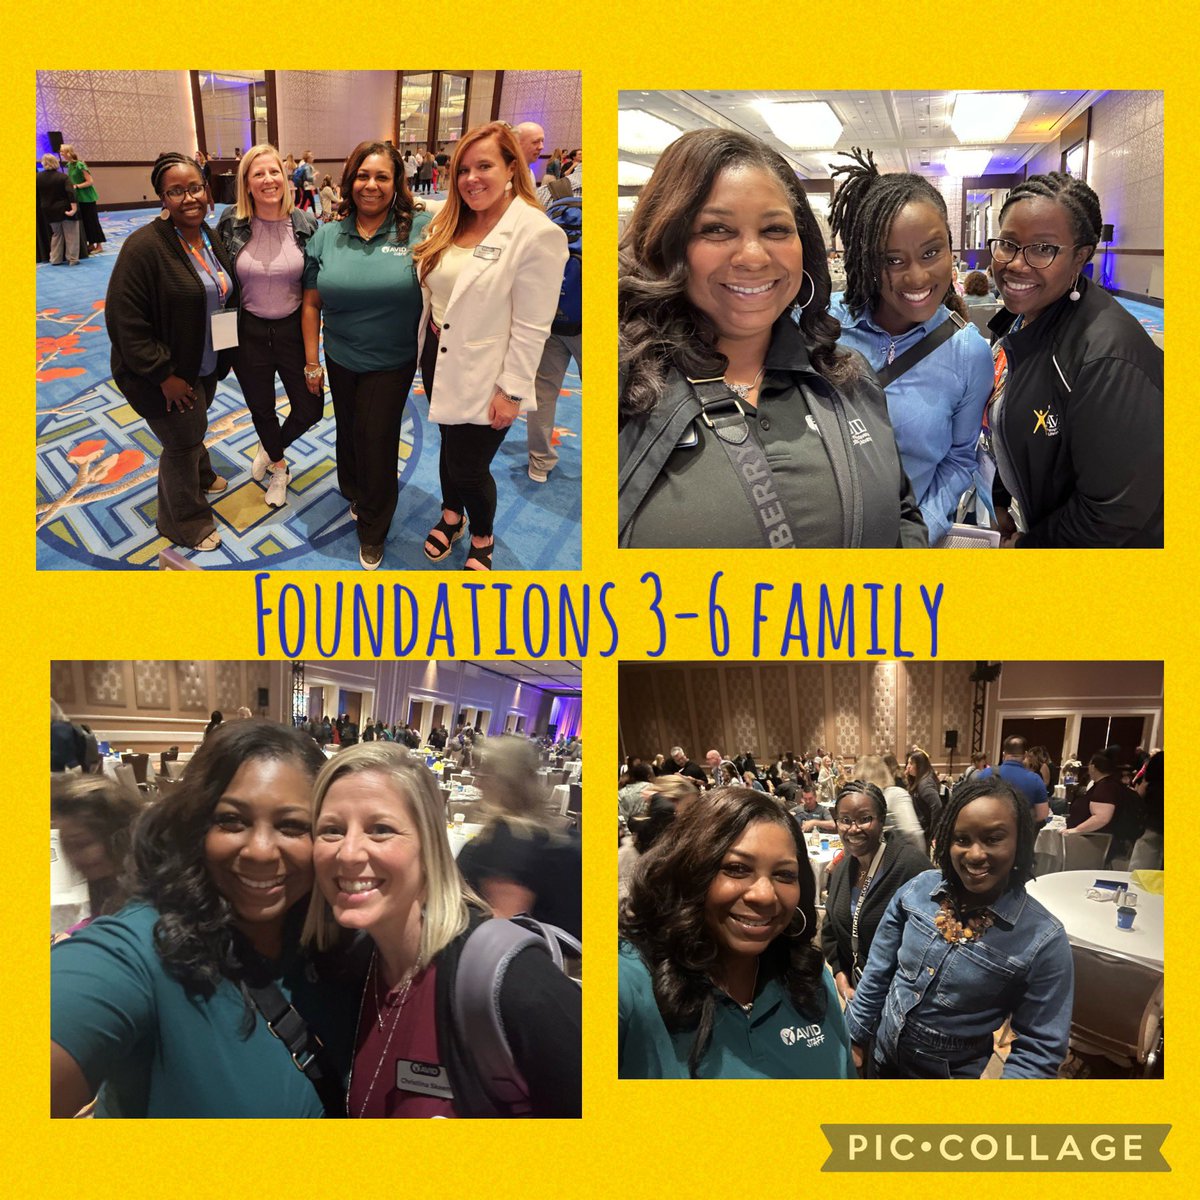 AVID Staff Developer training in Dallas was a blast! I love my 3-6 Foundations family, but had the honor of being cross trained on AVID Elective Implementation. Learning while having fun is just 1 of the great things about being a Staff Developer! Can’t wait for Summer Institute!